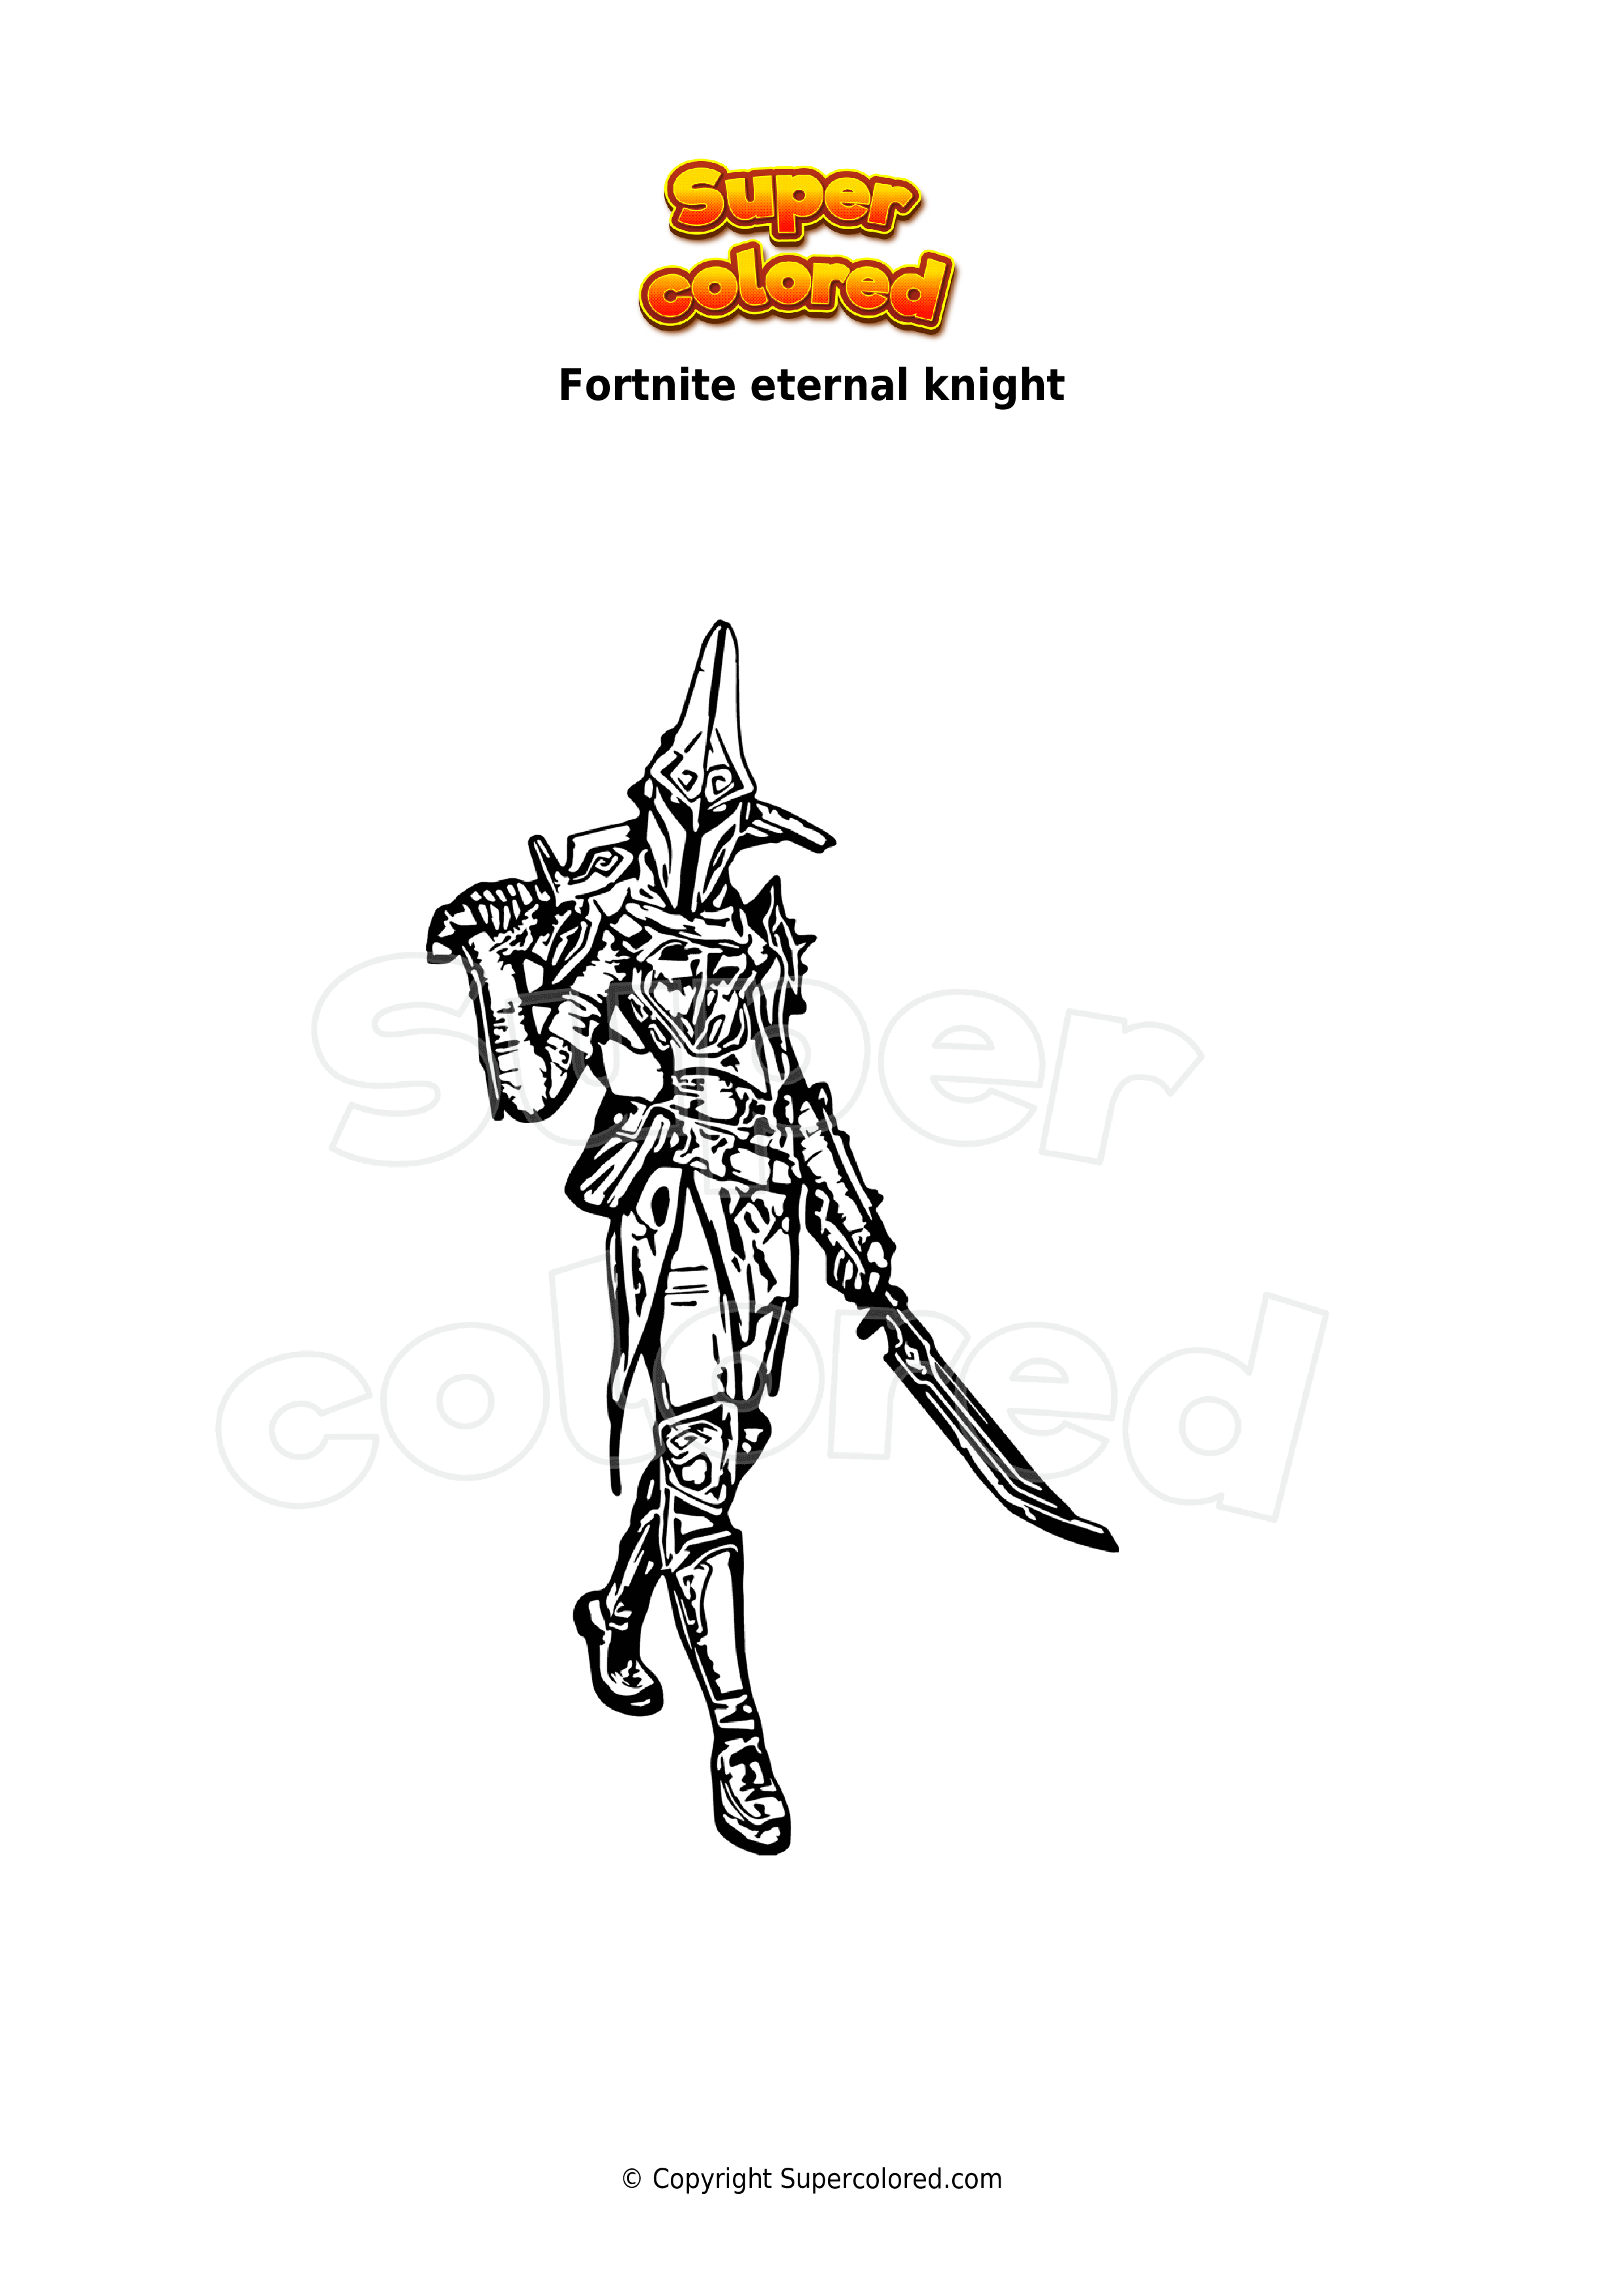 Fortnite Dark Knight Coloring Pages